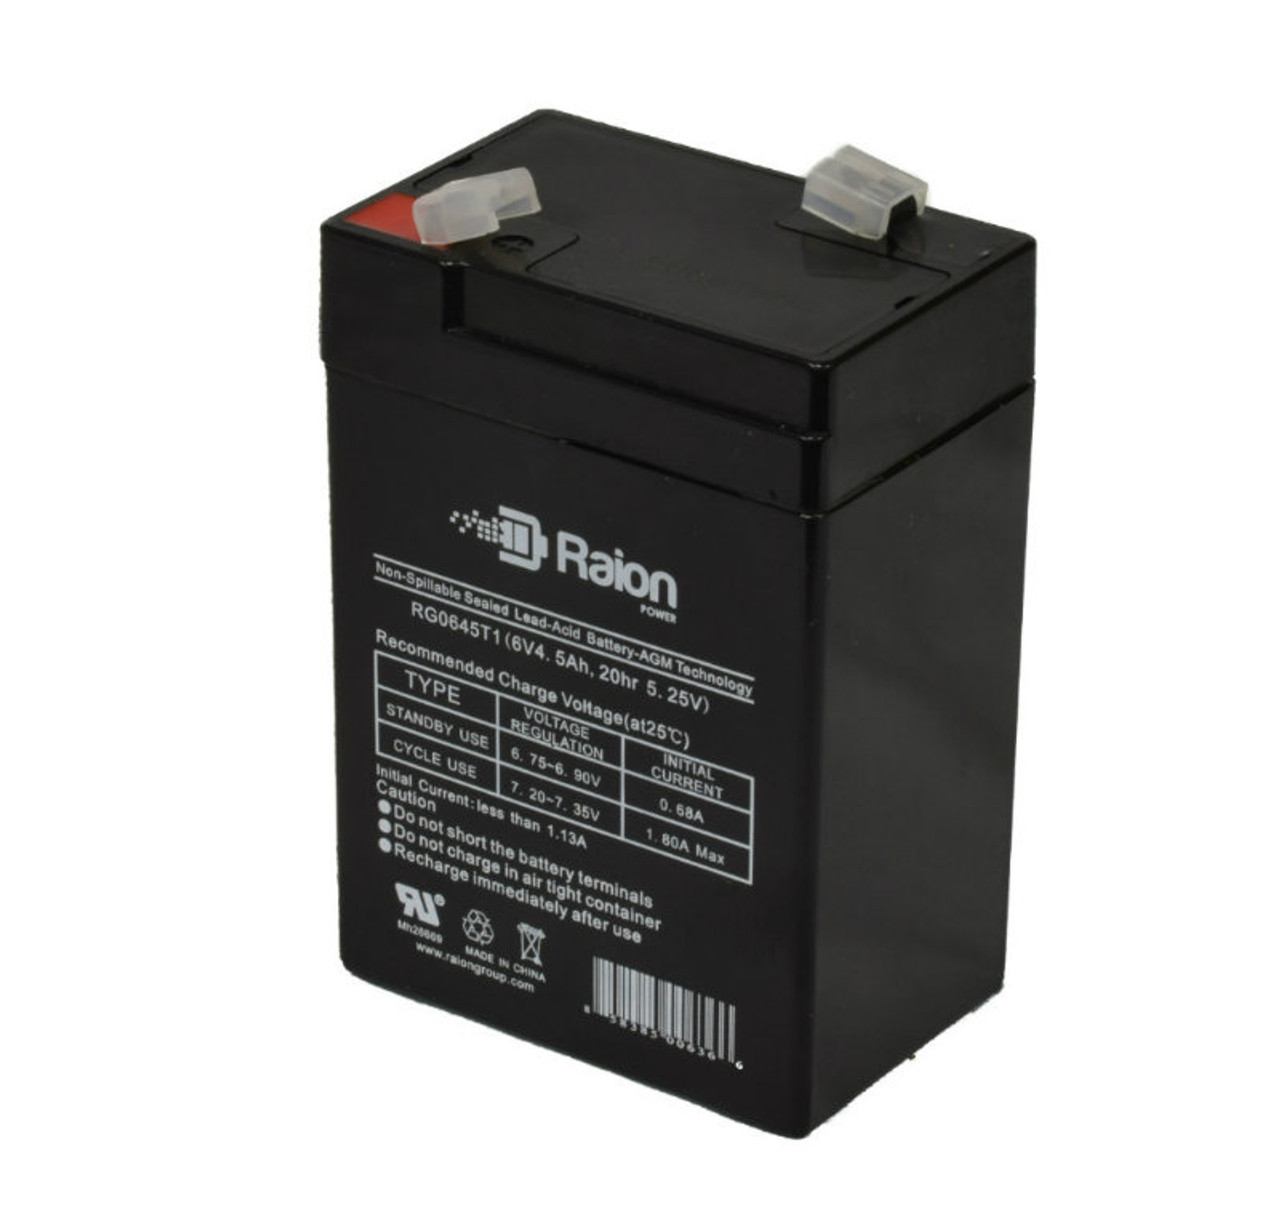 Raion Power RG0645T1 6V 4.5Ah Replacement Battery Cartridge for Chiway SJ6V4Ah-S